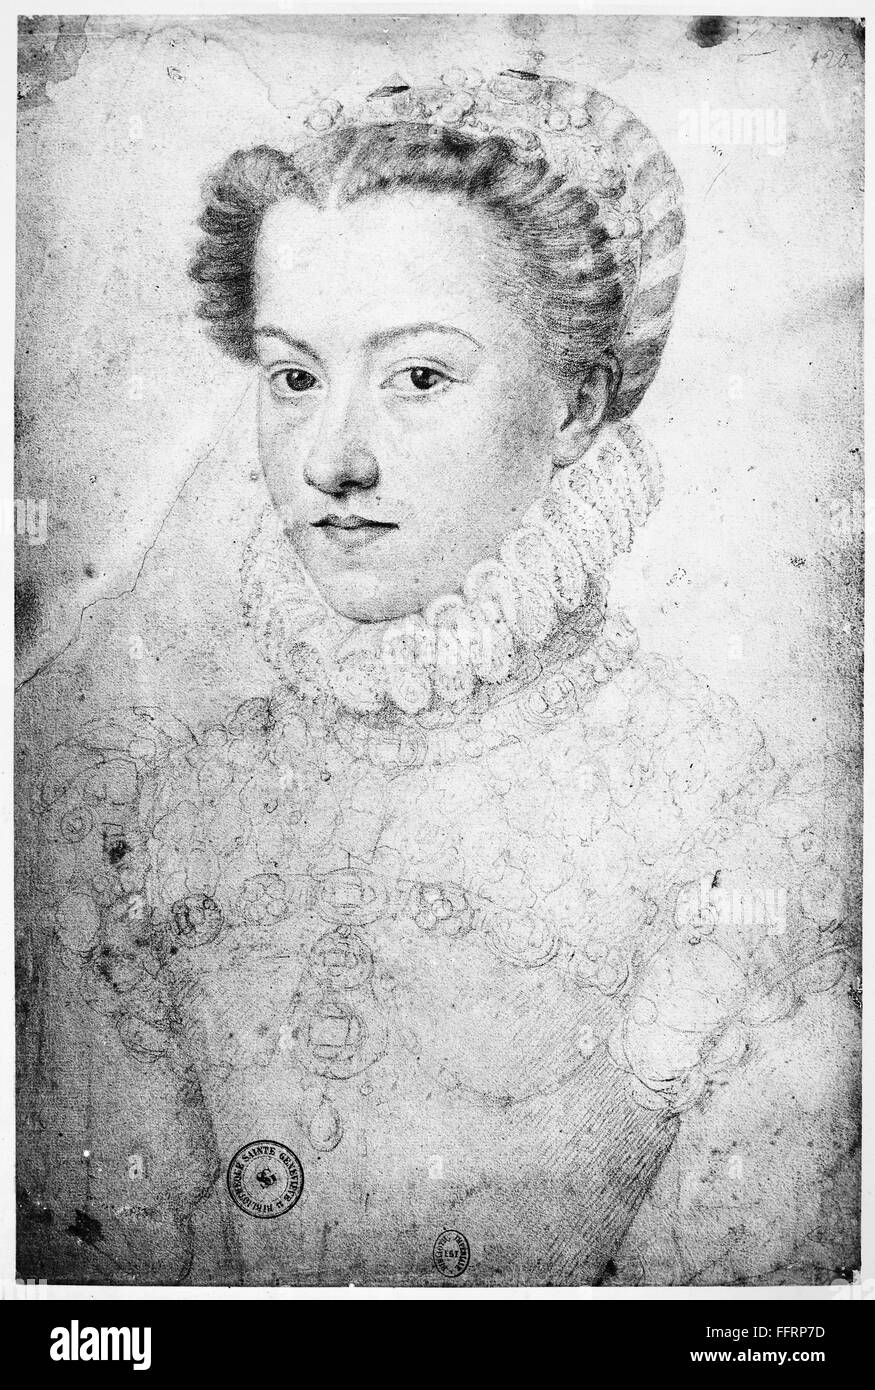 ELIZABETH OF AUSTRIA /n(1554-1592). Archduchess of Austria and Queen consort of Charles IX of France. Drawing by Franτois Clouet, c1570. Stock Photo